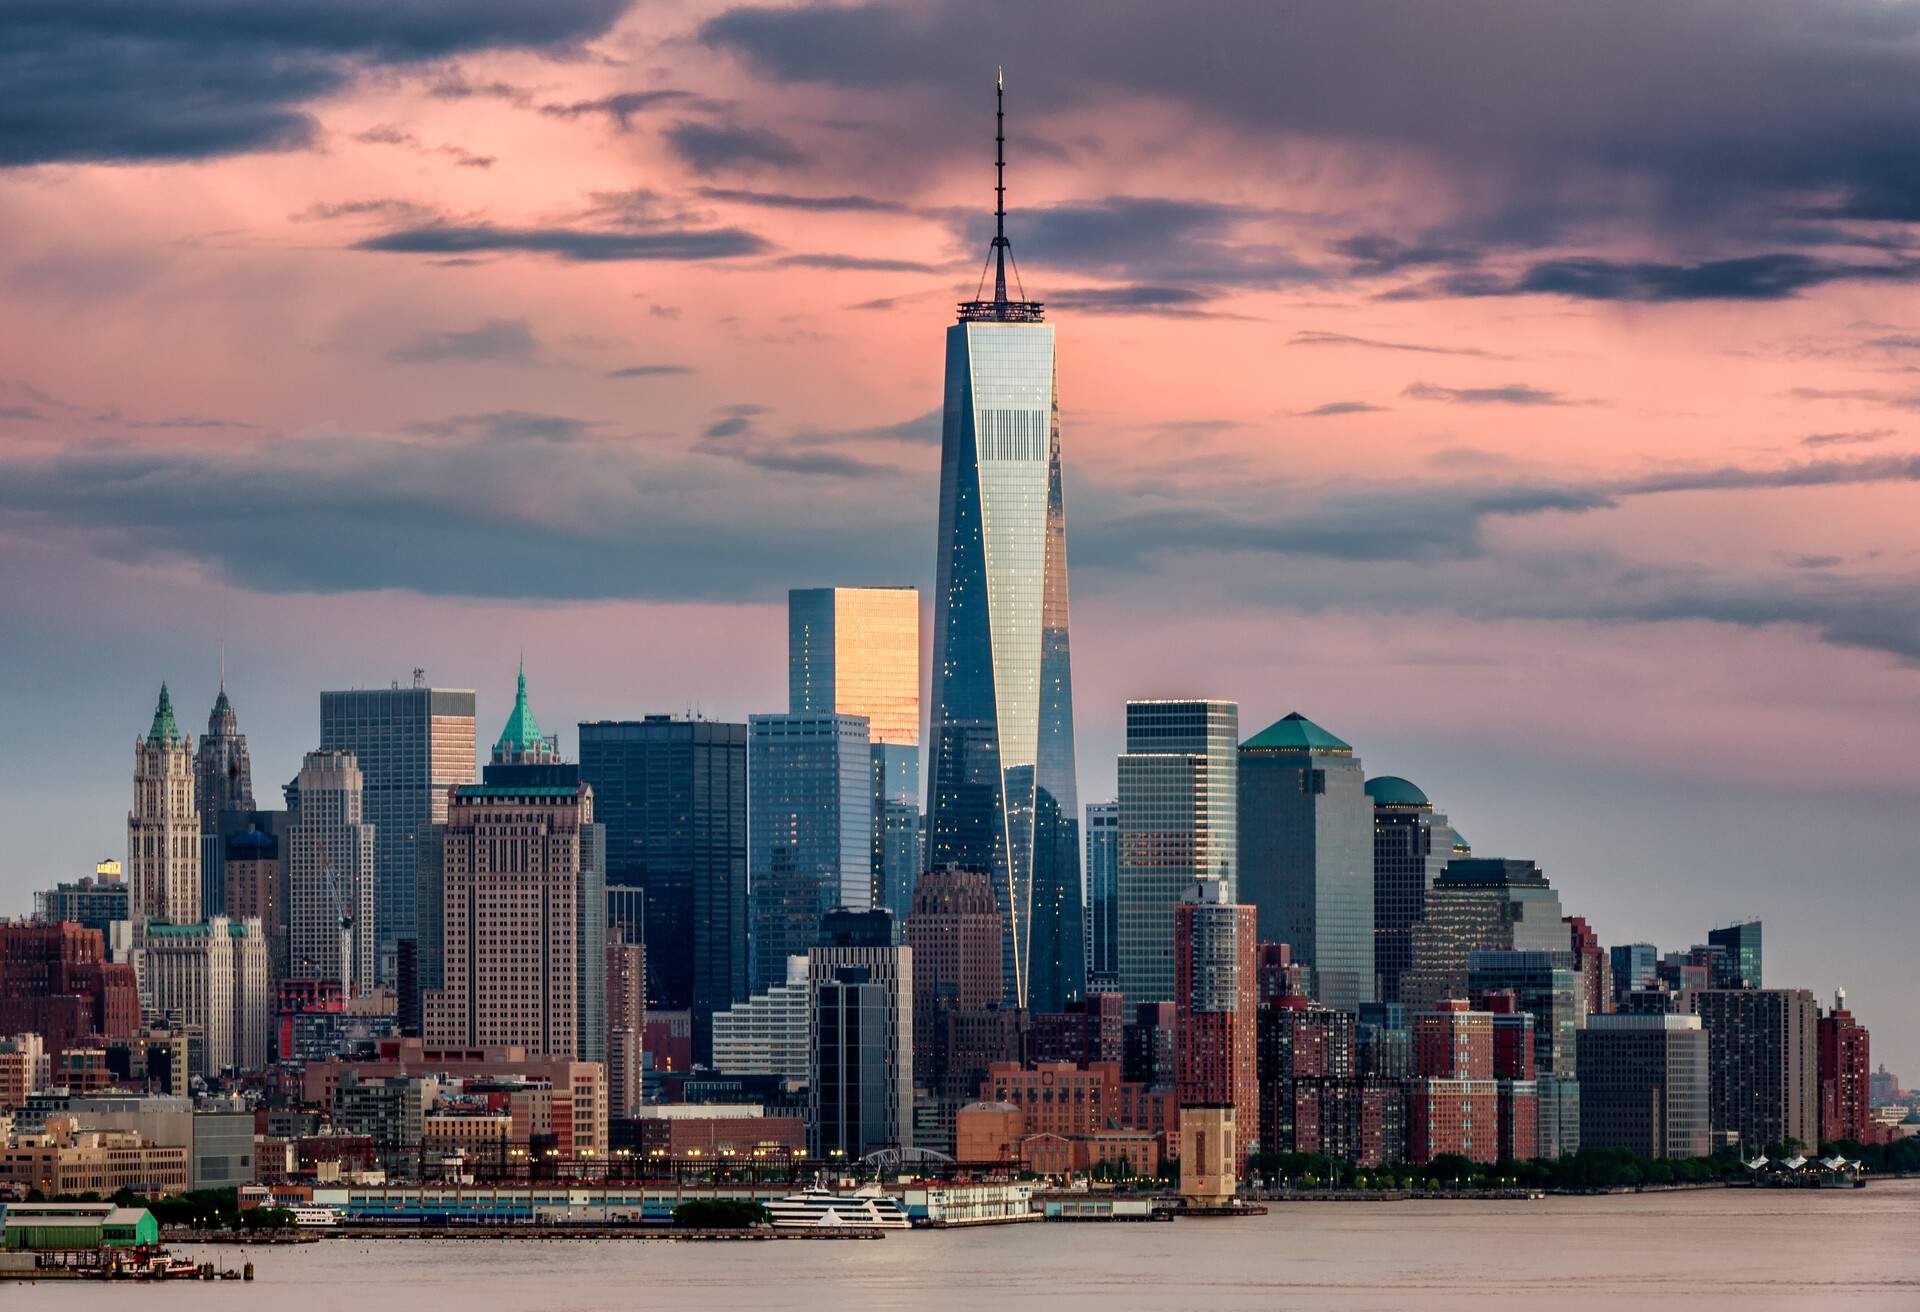 DEST_USA_NEW_YORK_ONE_WORLD_TRADE_CENTER_GettyImages-529106152